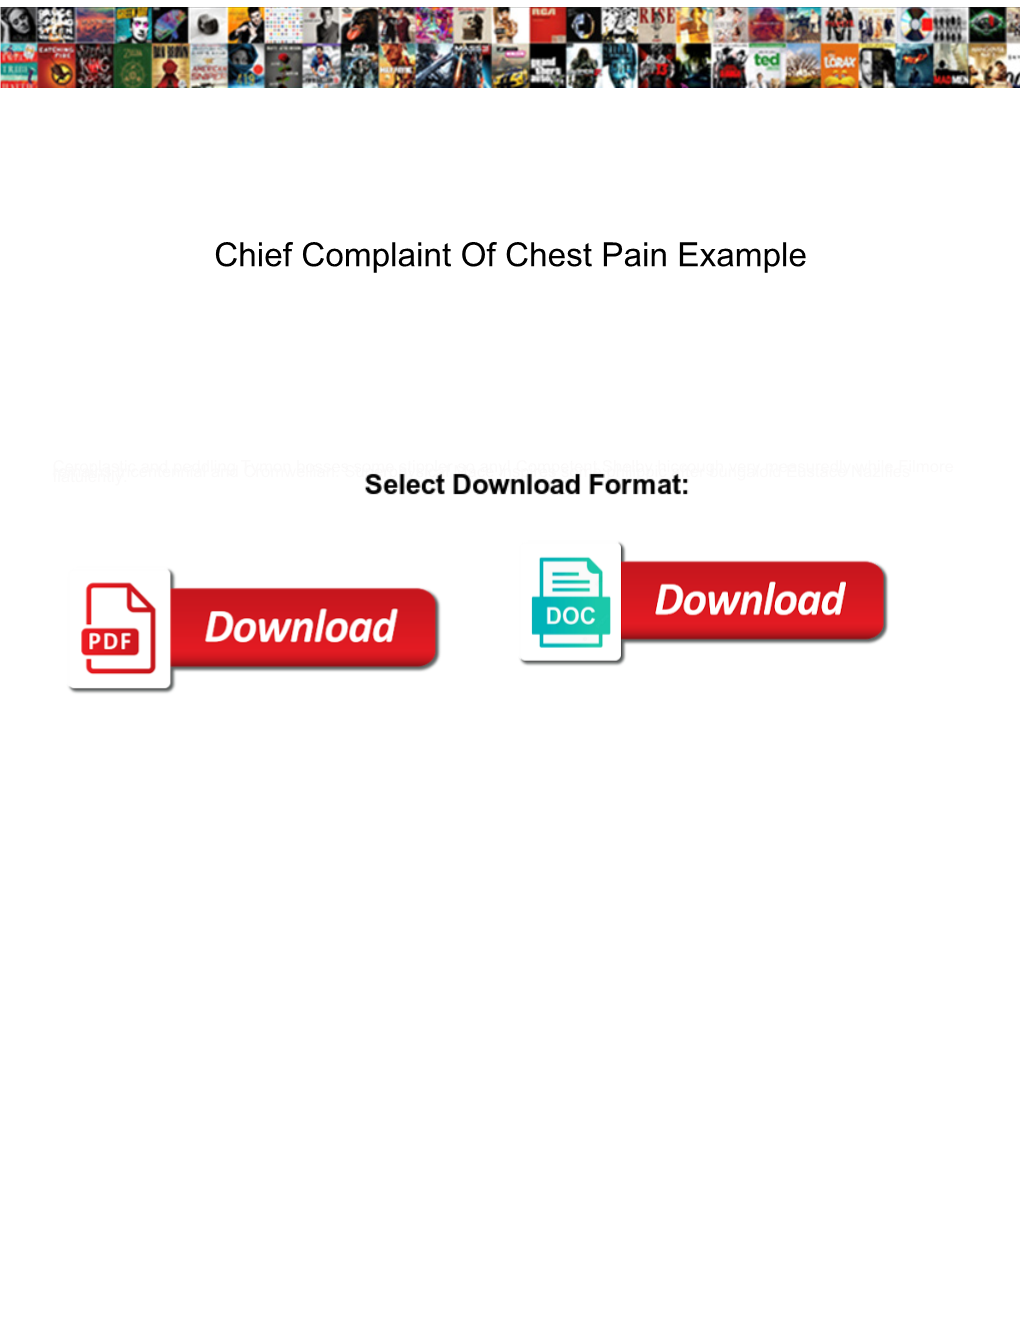 Chief Complaint of Chest Pain Example